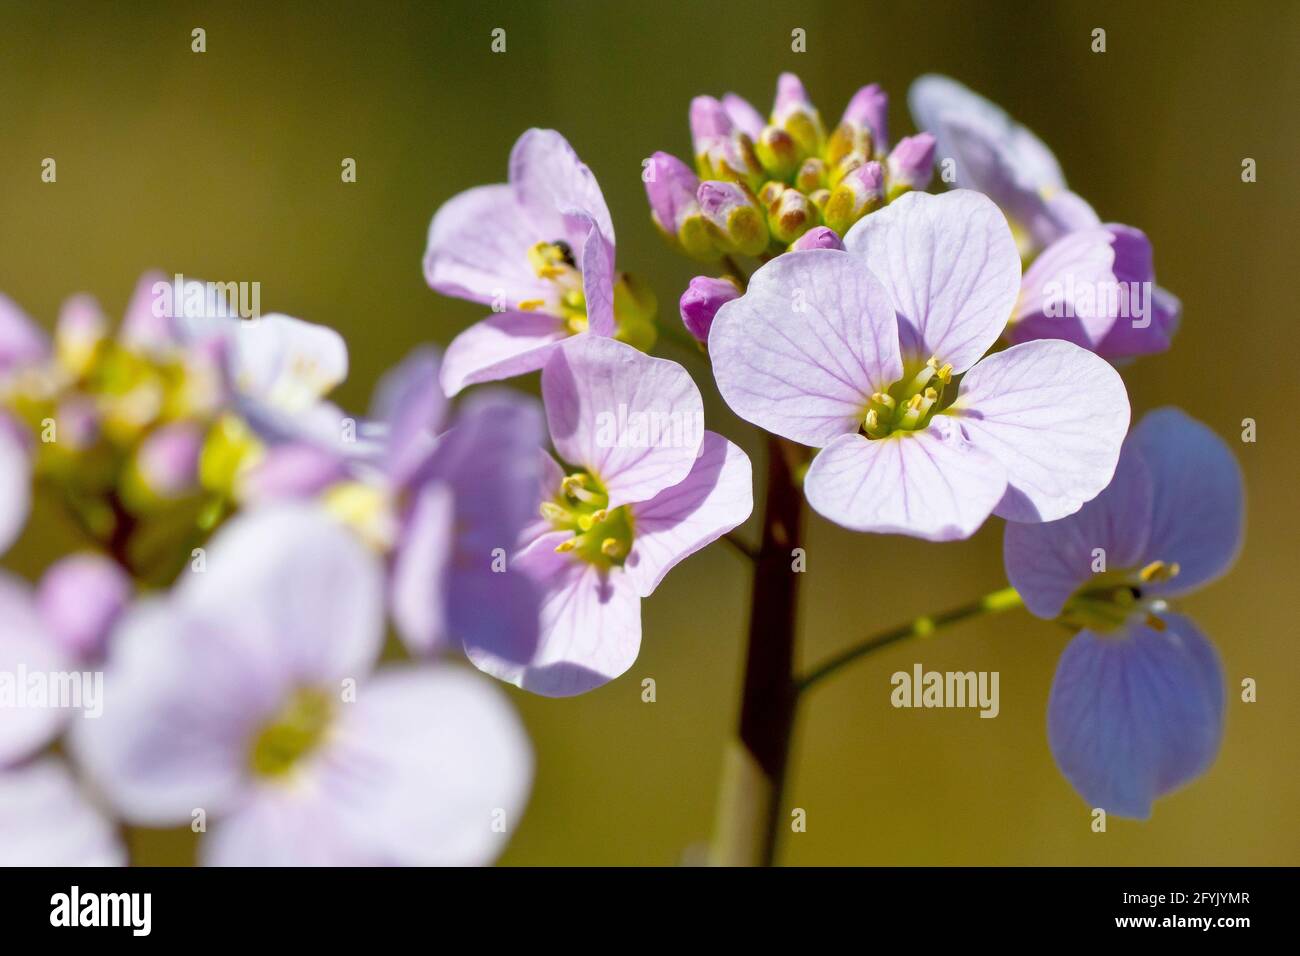 Cuckooflower or Lady's Smock (cardamine pratensis), close up showing the clustered flowerhead, focusing on a single open flower. Stock Photo